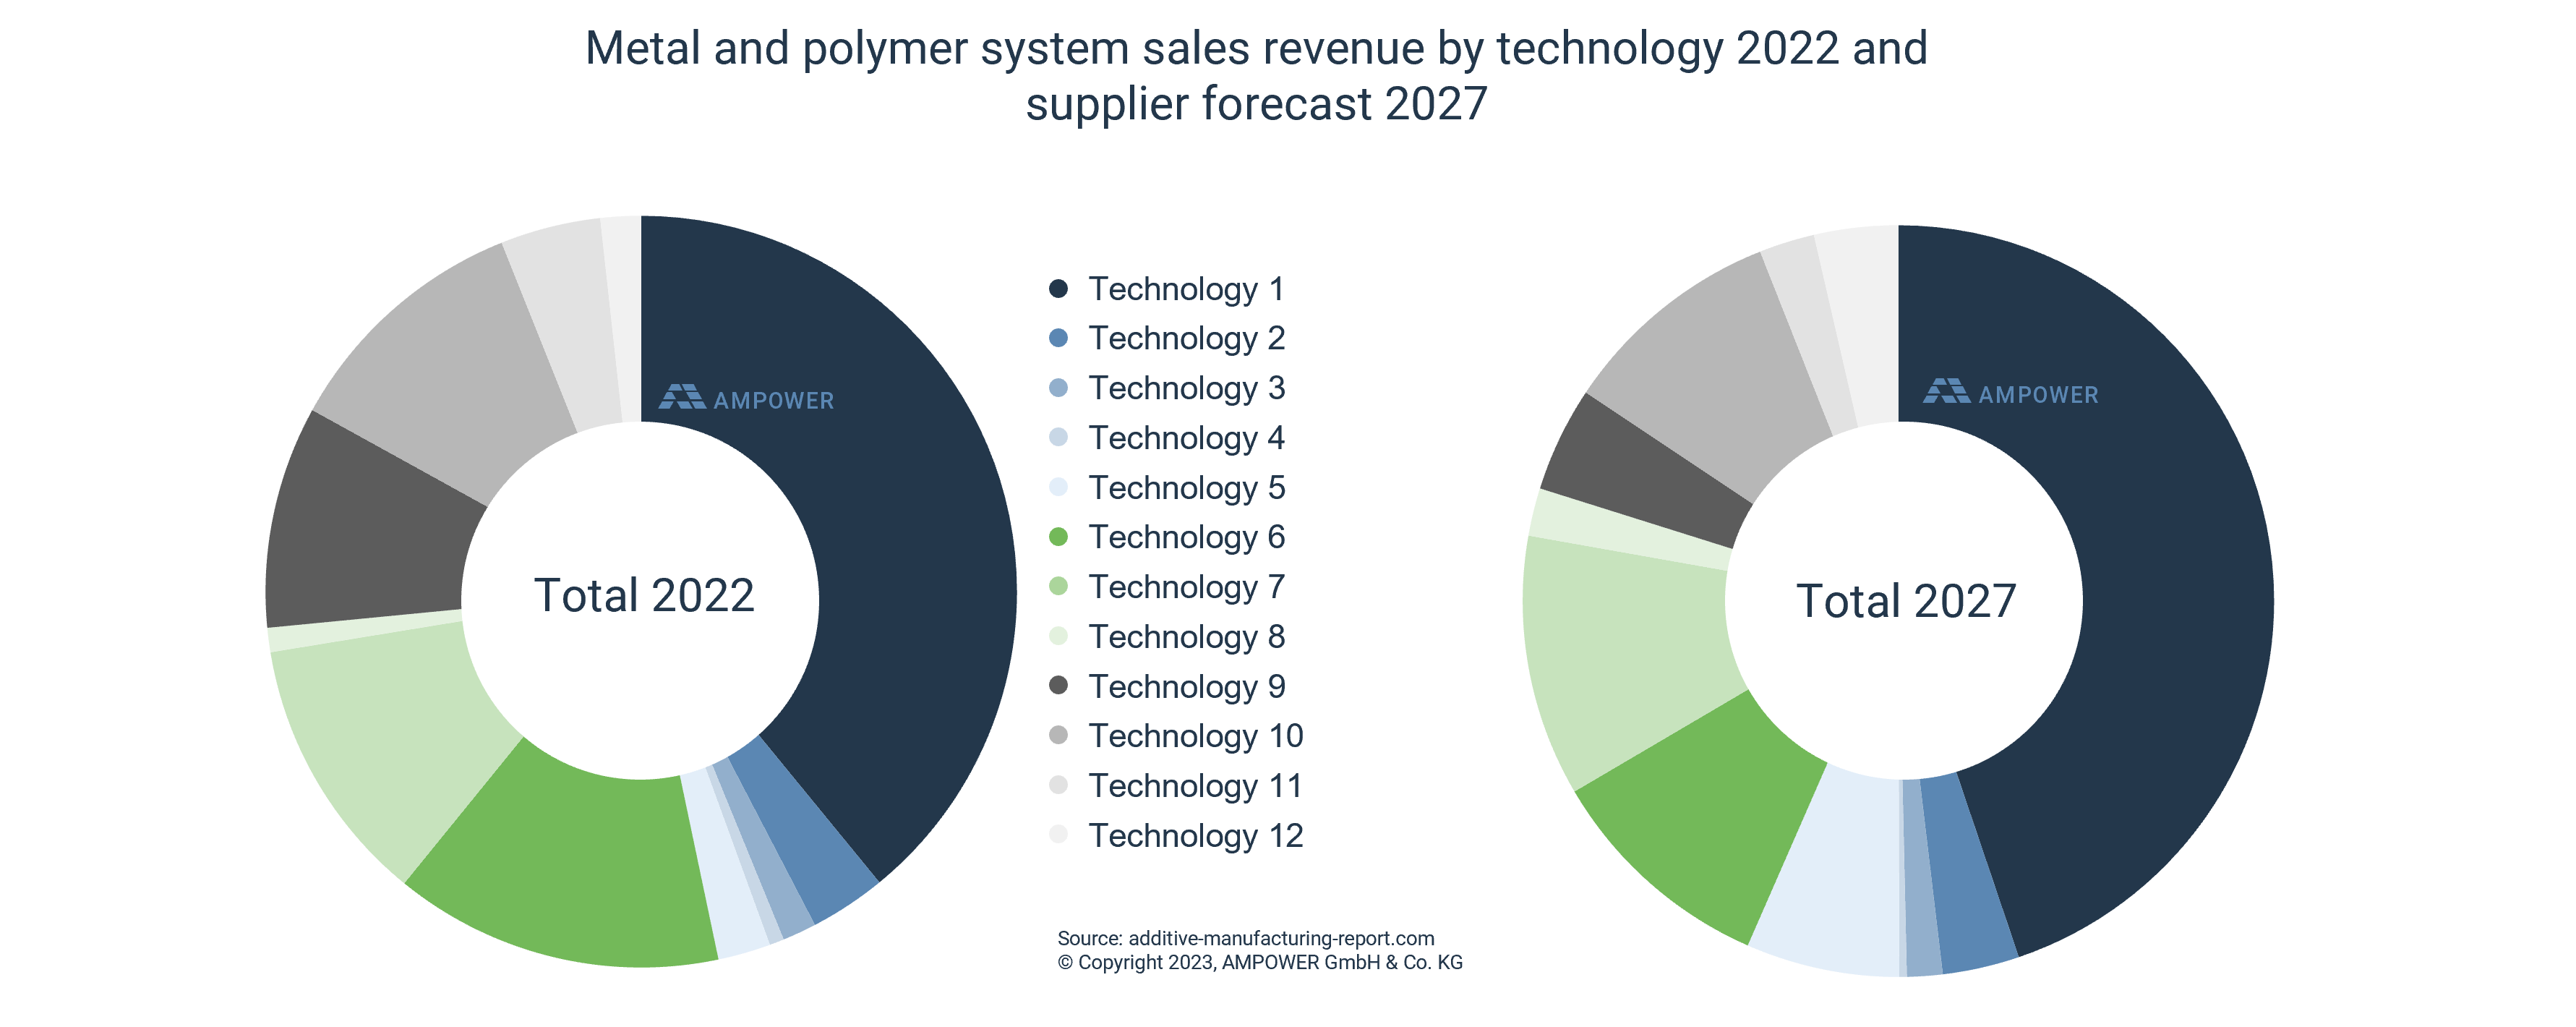 Metal and polymer system sales revenue by technology 2022 and supplier forecast 2027 [EUR billion] dummie